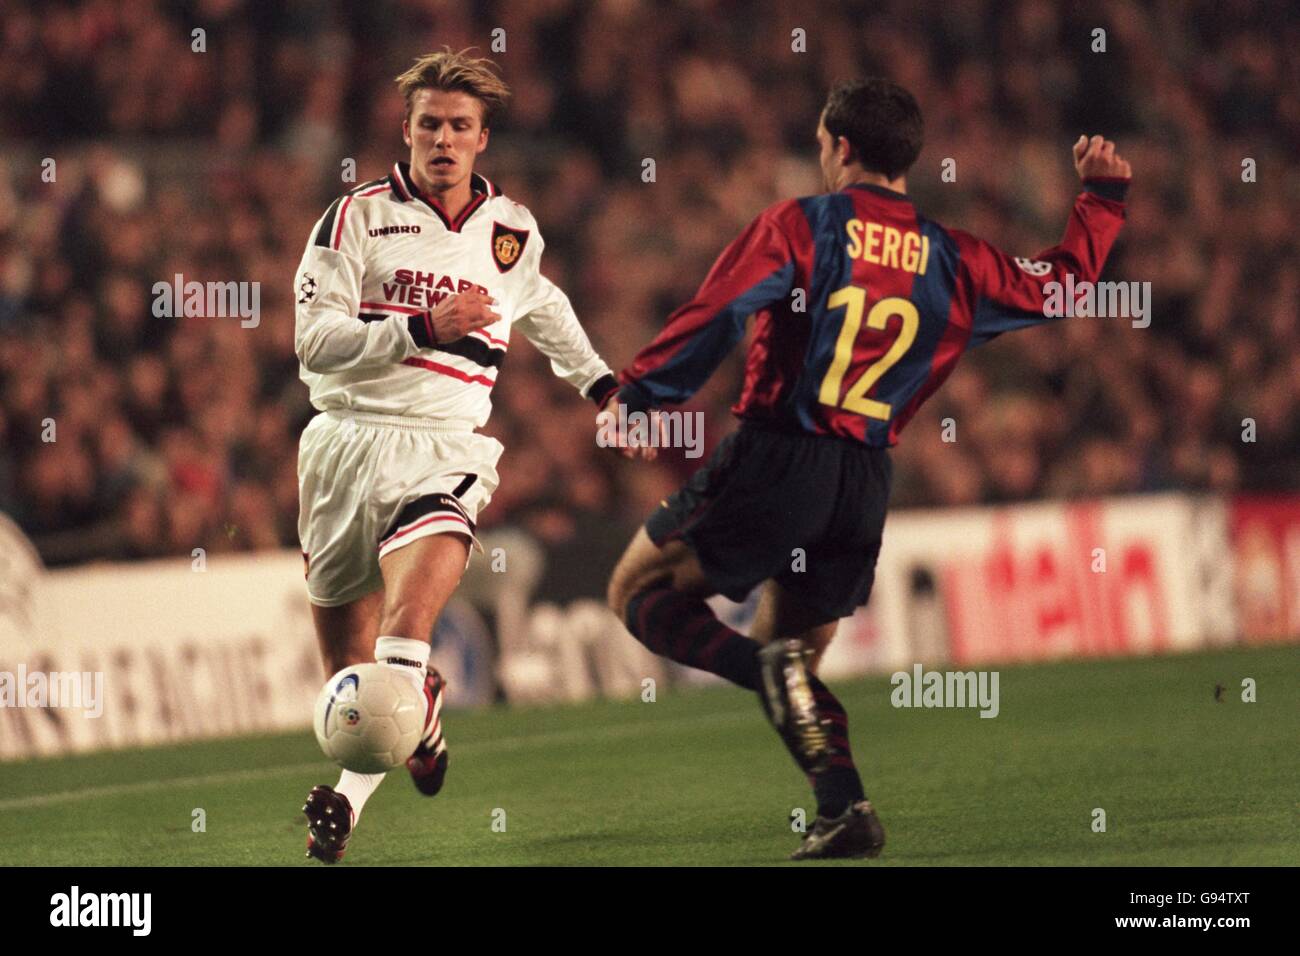 Barcelona's Sergi (right) moves across to tackle Manchester United's David Beckham (left) Stock Photo